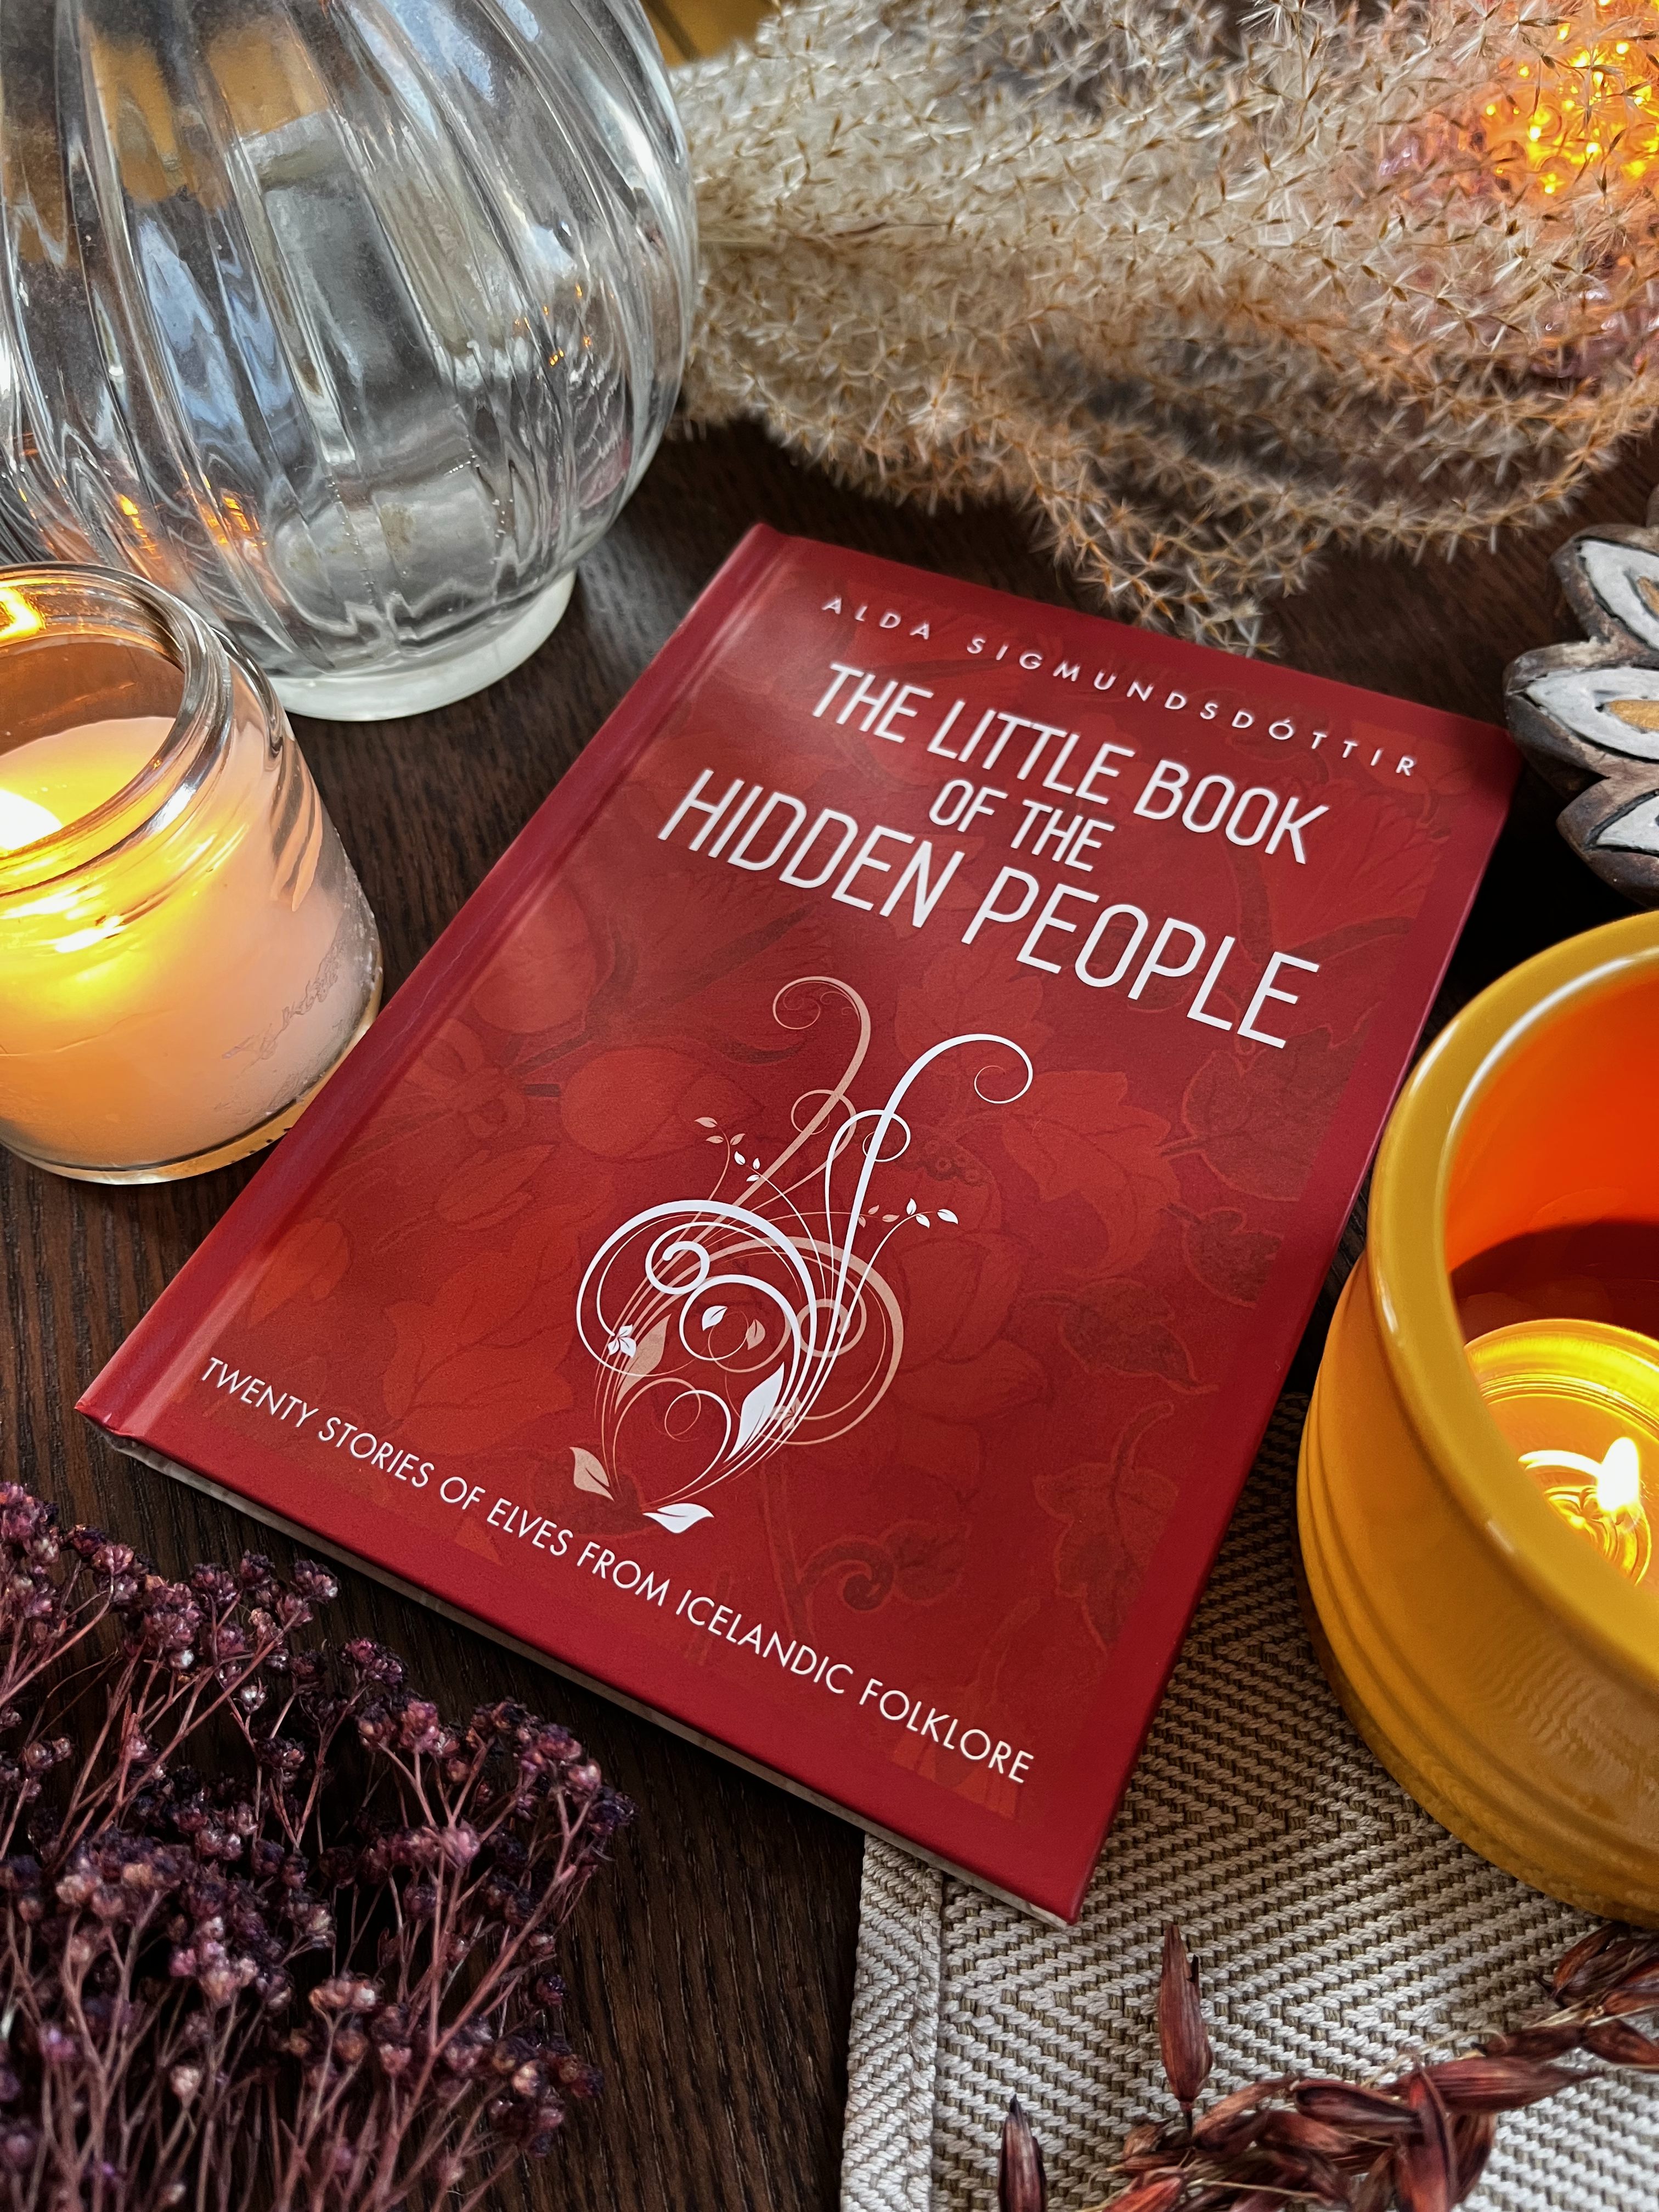 Hardcover copy of The Little Book of the Hidden People lying on a cloth